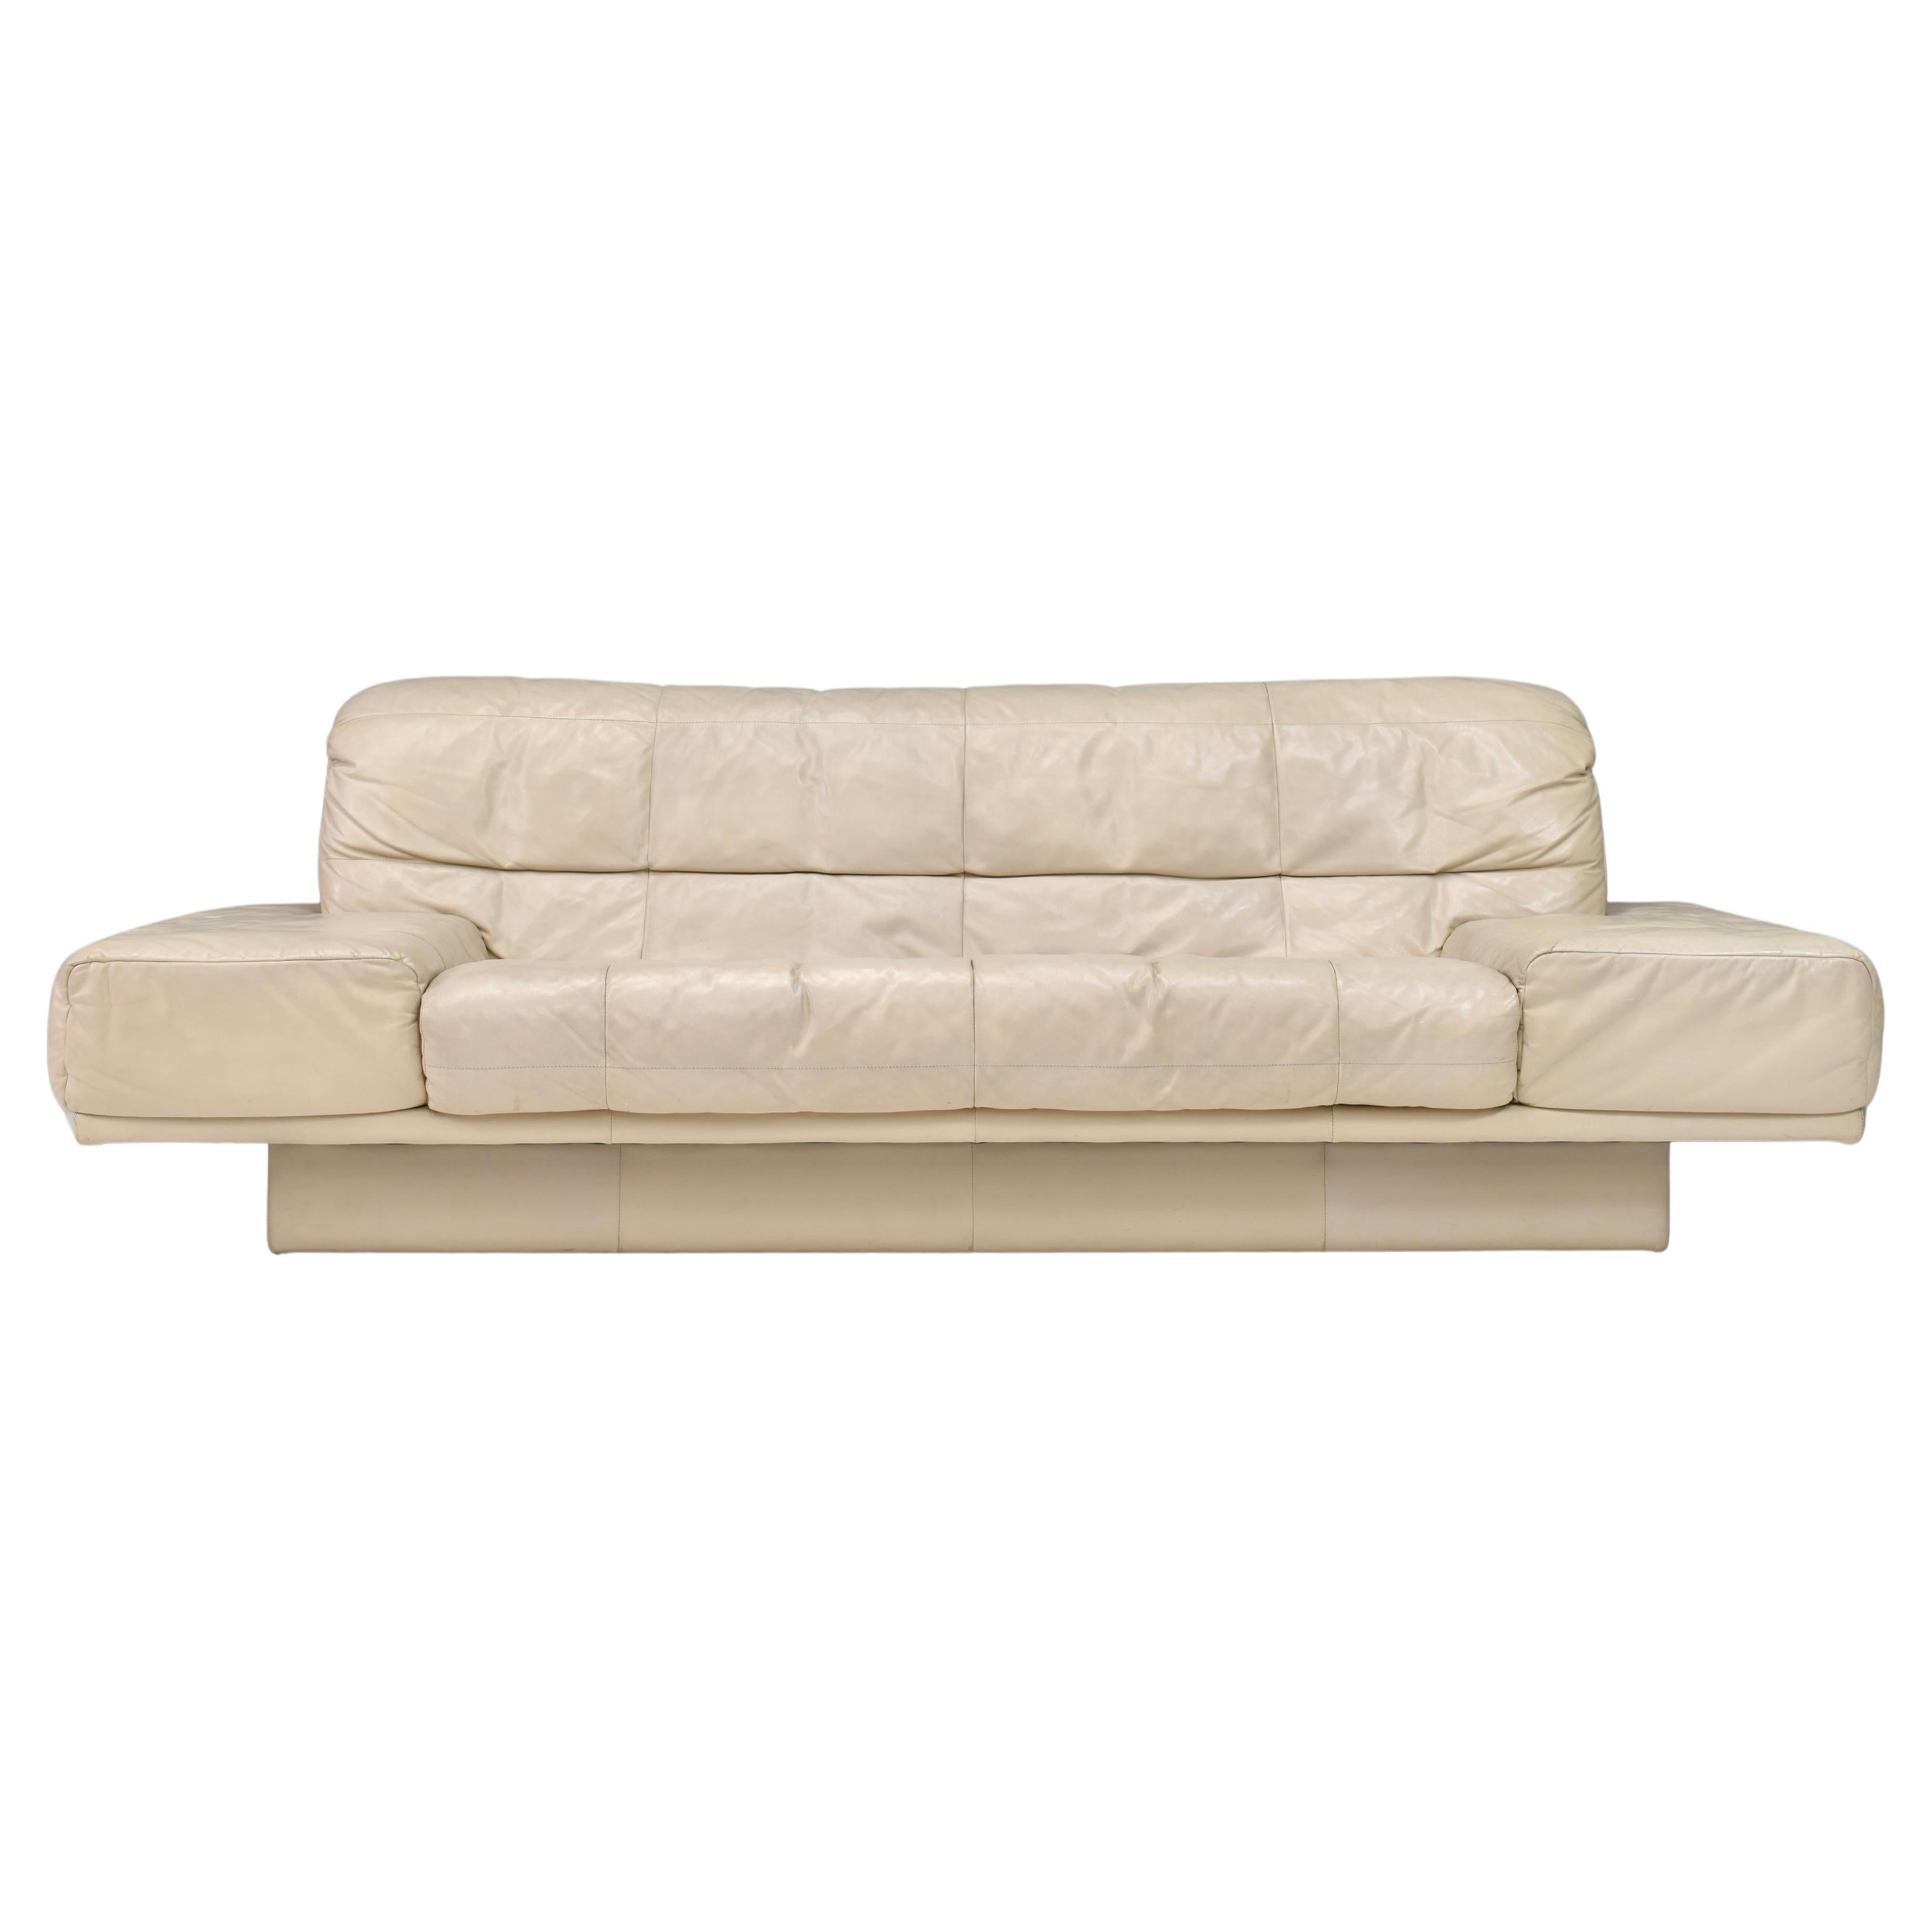 Rolf Benz 3-seat sofa in Ivory Cream Leather – Germany, circa 1980-1990 For Sale